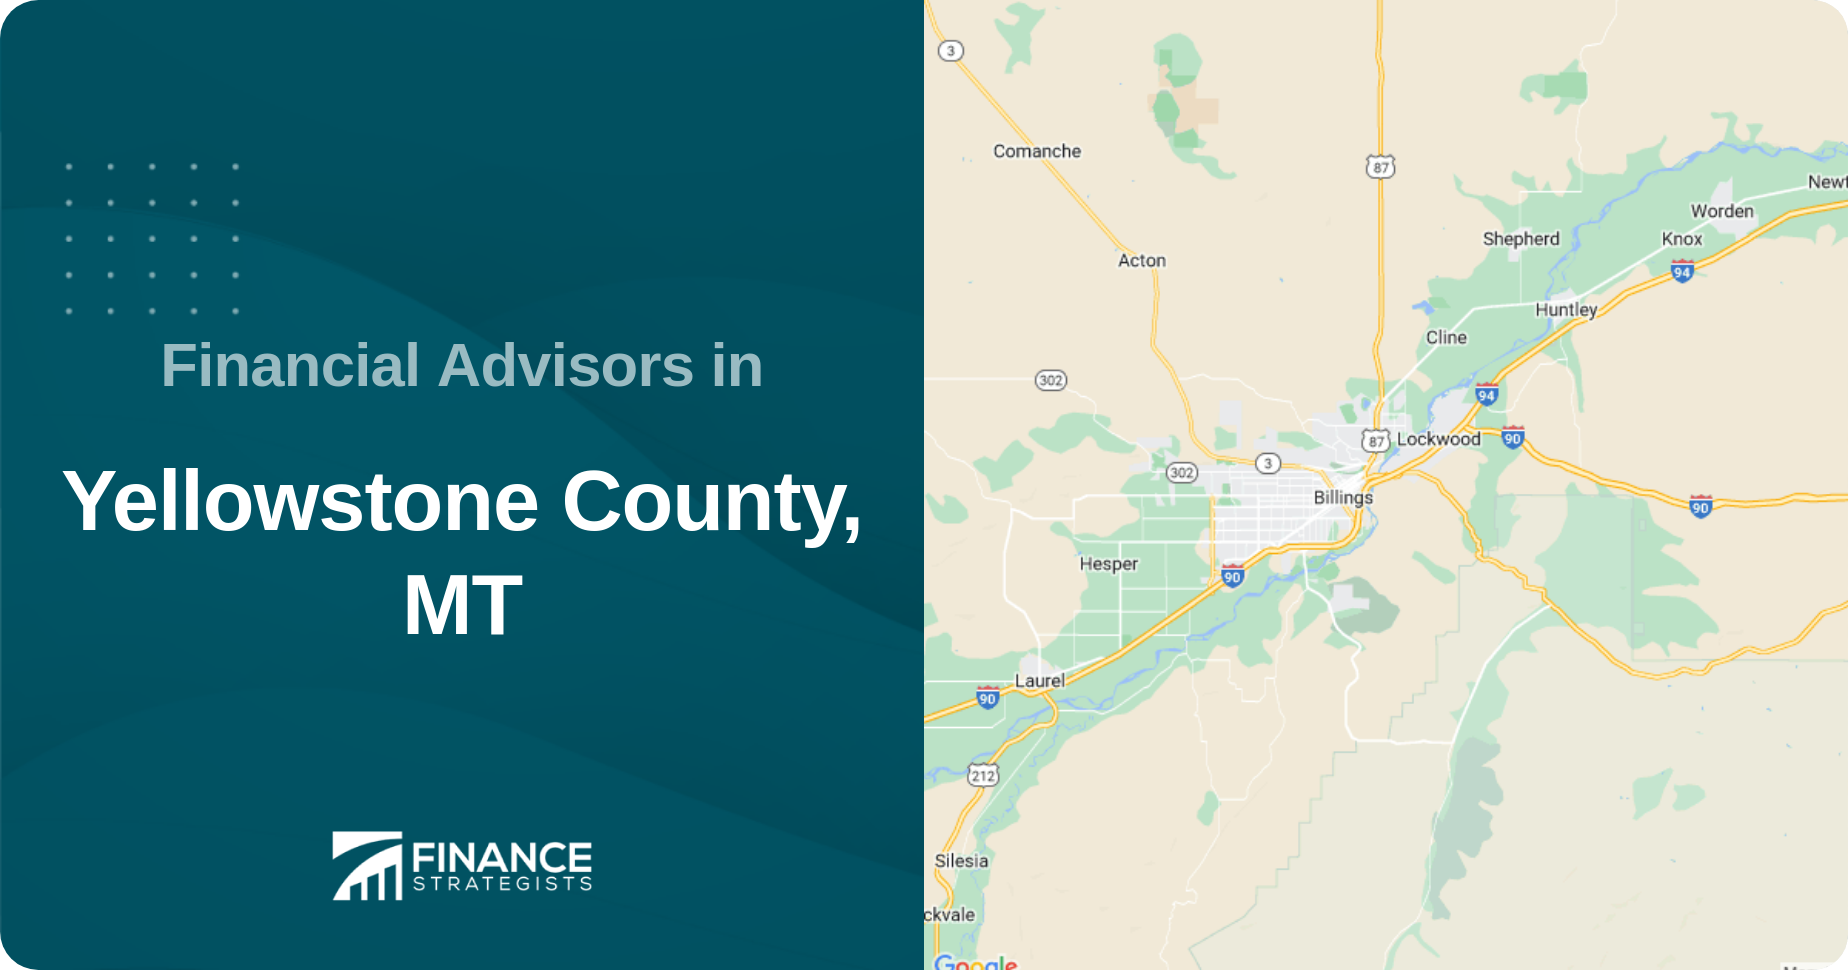 Financial Advisors in Yellowstone County, MT